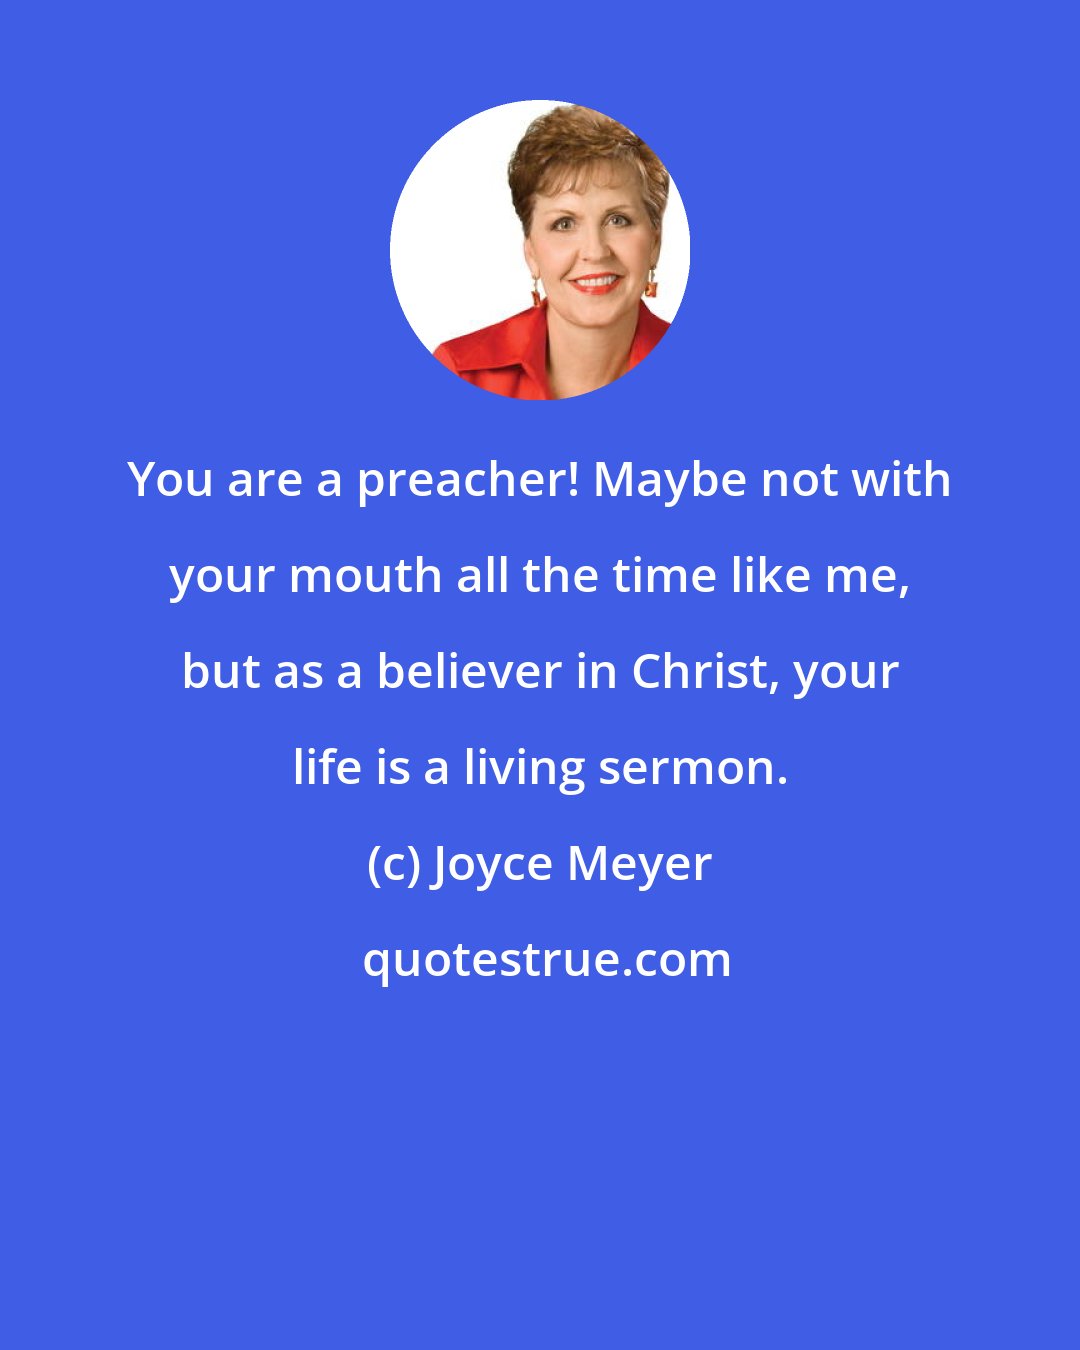 Joyce Meyer: You are a preacher! Maybe not with your mouth all the time like me, but as a believer in Christ, your life is a living sermon.